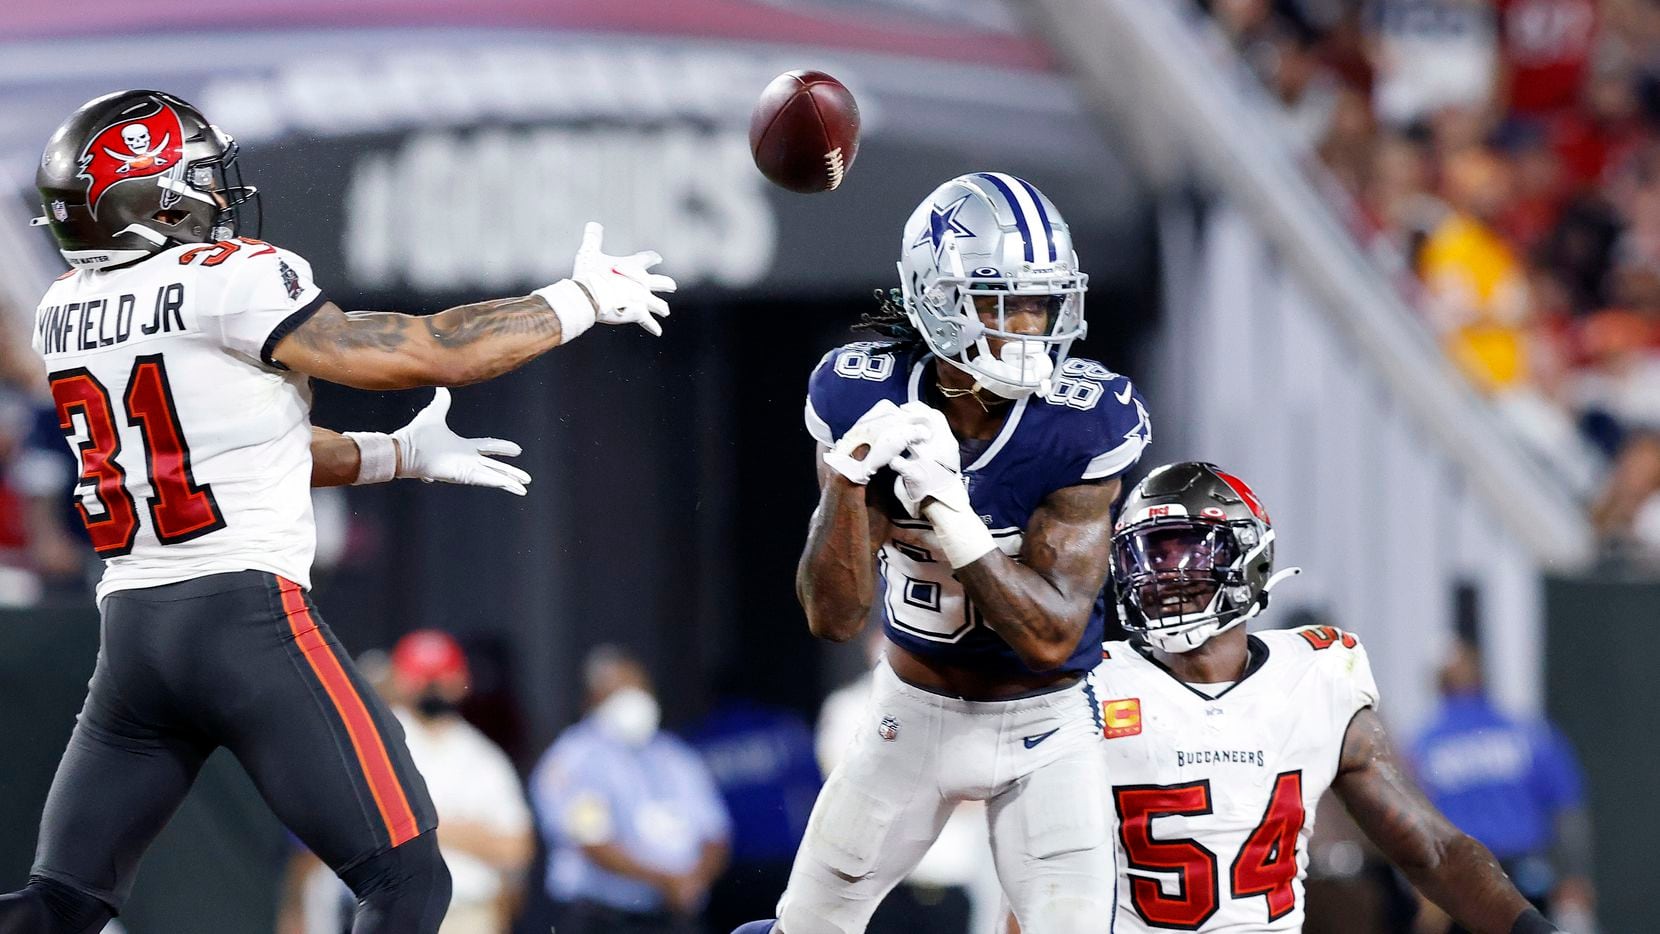 Dallas Cowboys wide receiver CeeDee Lamb (88) lets a pass slip through his fingers in the third quarter allowing Tampa Bay Buccaneers cornerback Carlton Davis (not pictured) to intercept it at Raymond James Stadium in Tampa, Florida, Thursday, September 9, 2021. Joining in on the play is Tampa Bay Buccaneers safety Antoine Winfield Jr. (31). The Cowboys faced the Tampa Bay Buccaneers in the NFL season opener.